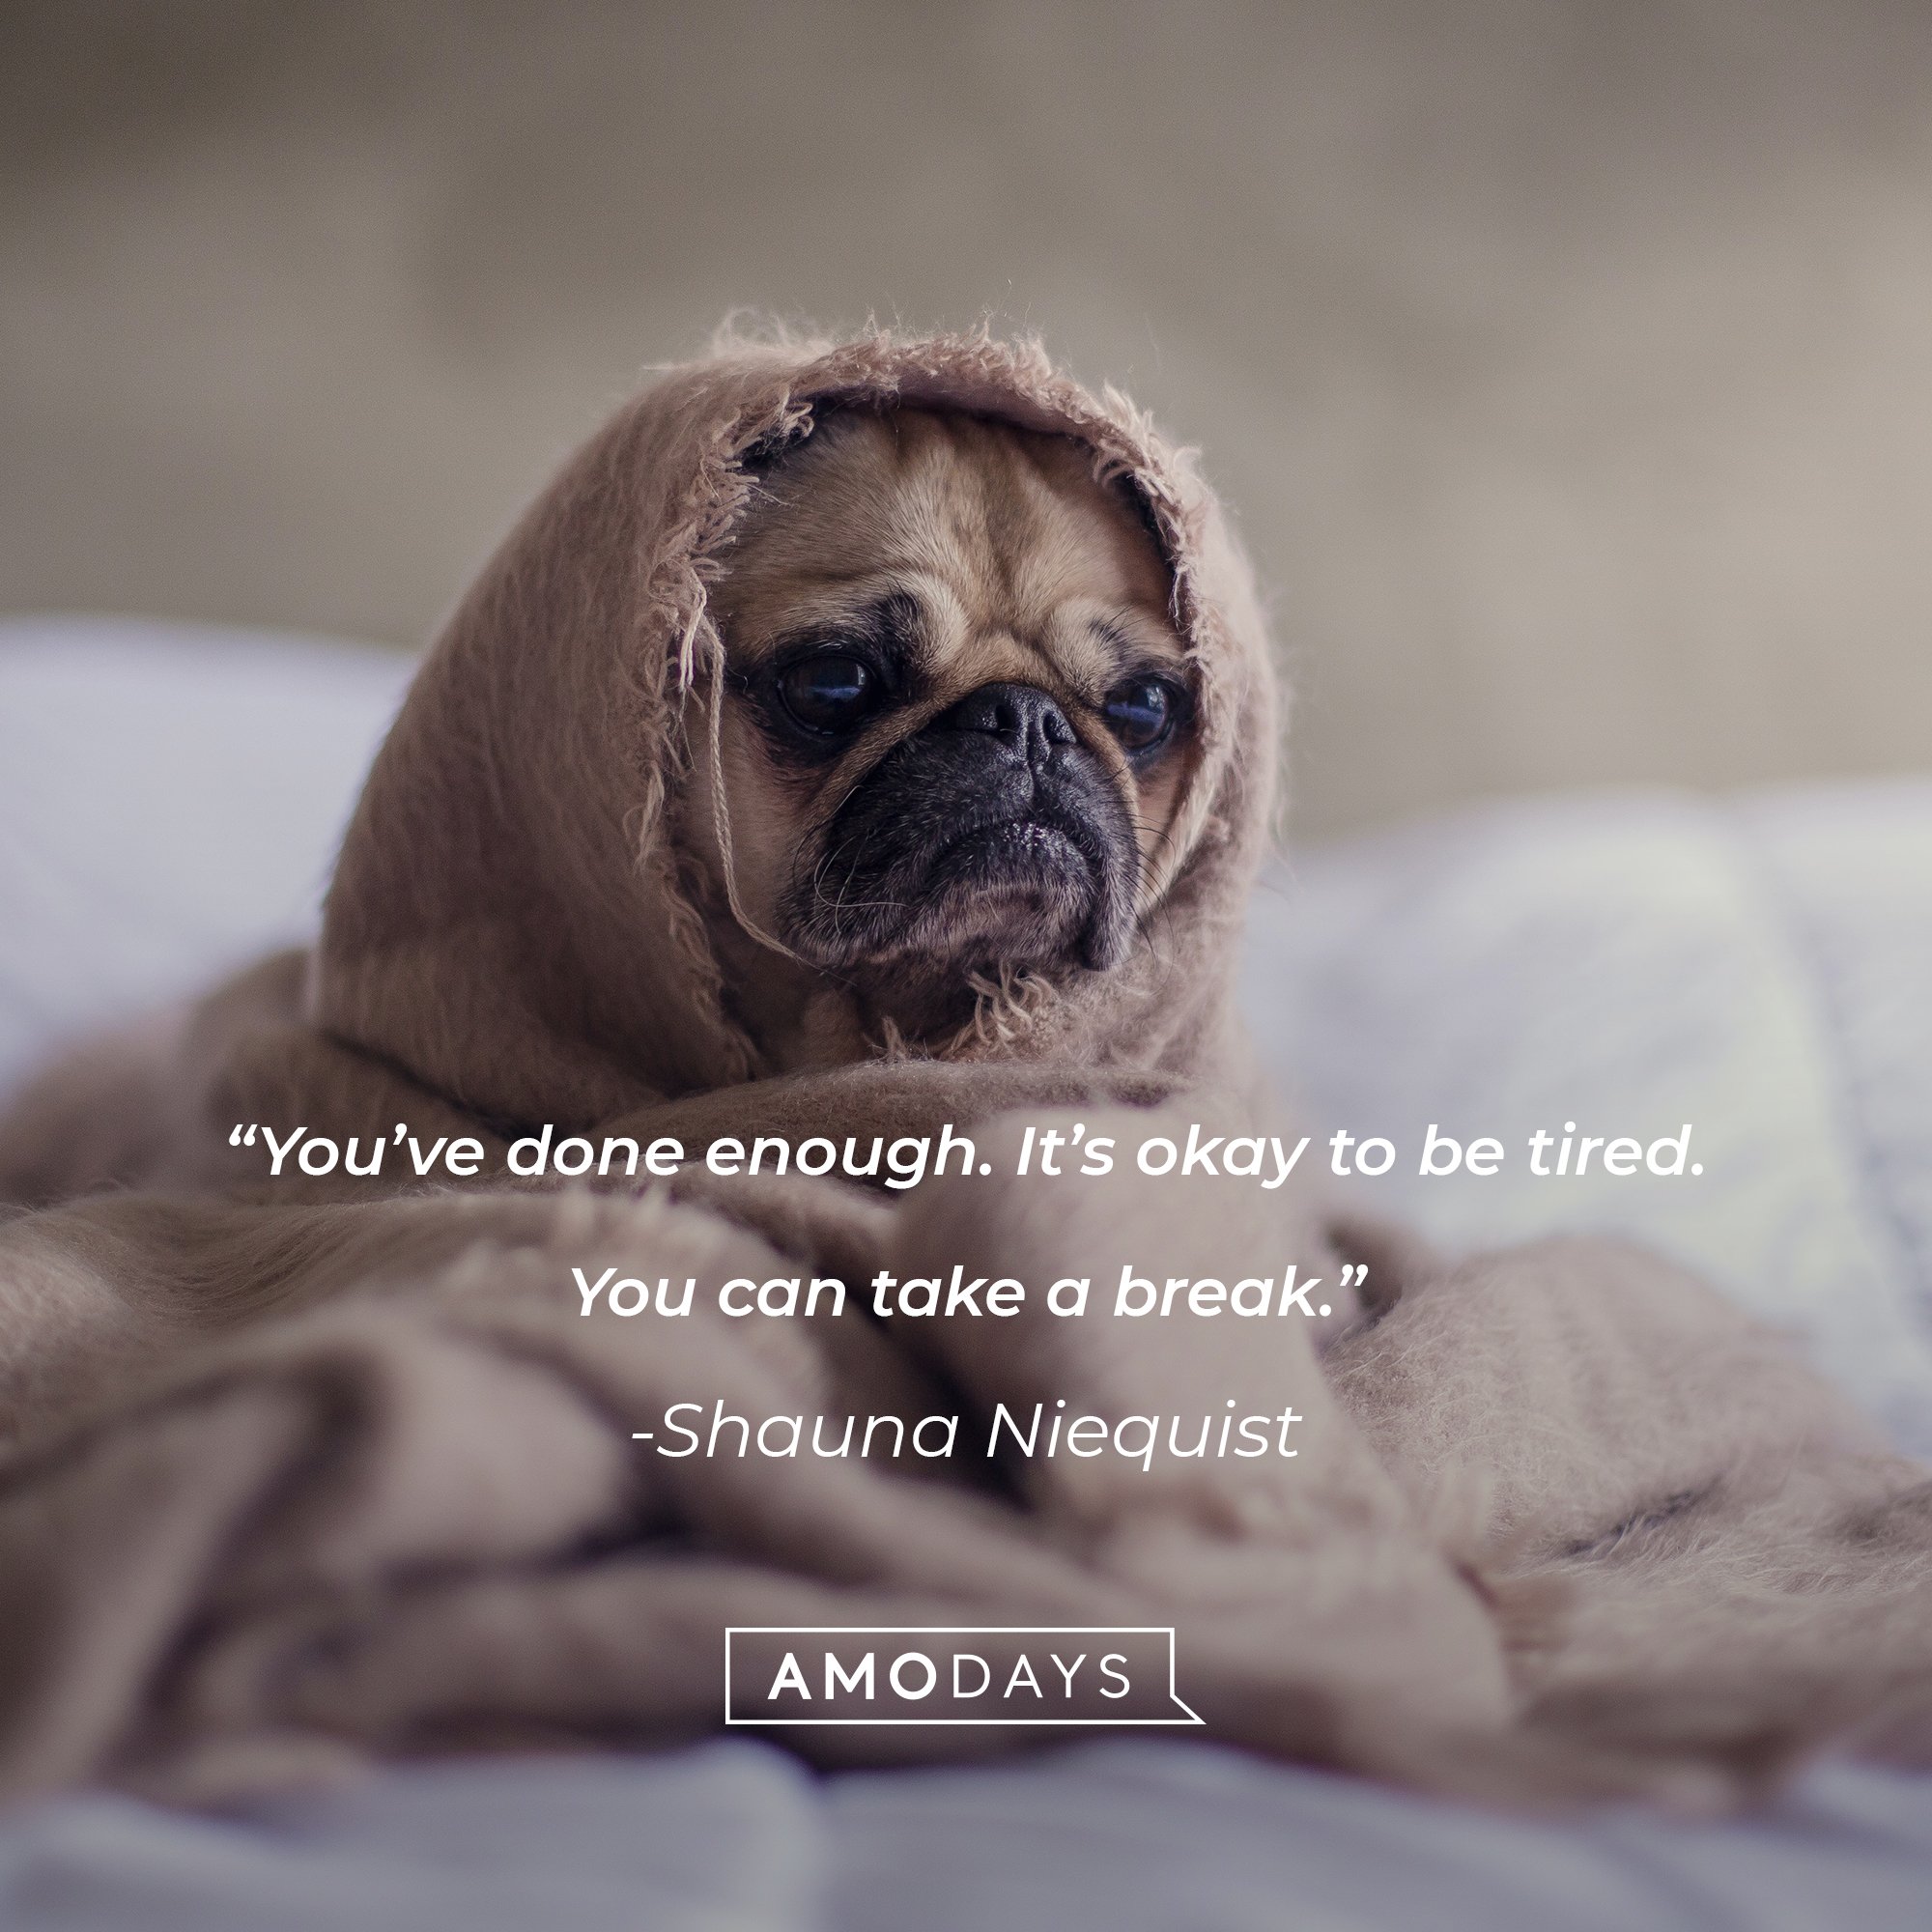 Shauna Niequist's quote: "You've done enough. It's okay to be tired. You can take a break." | Image: AmoDays